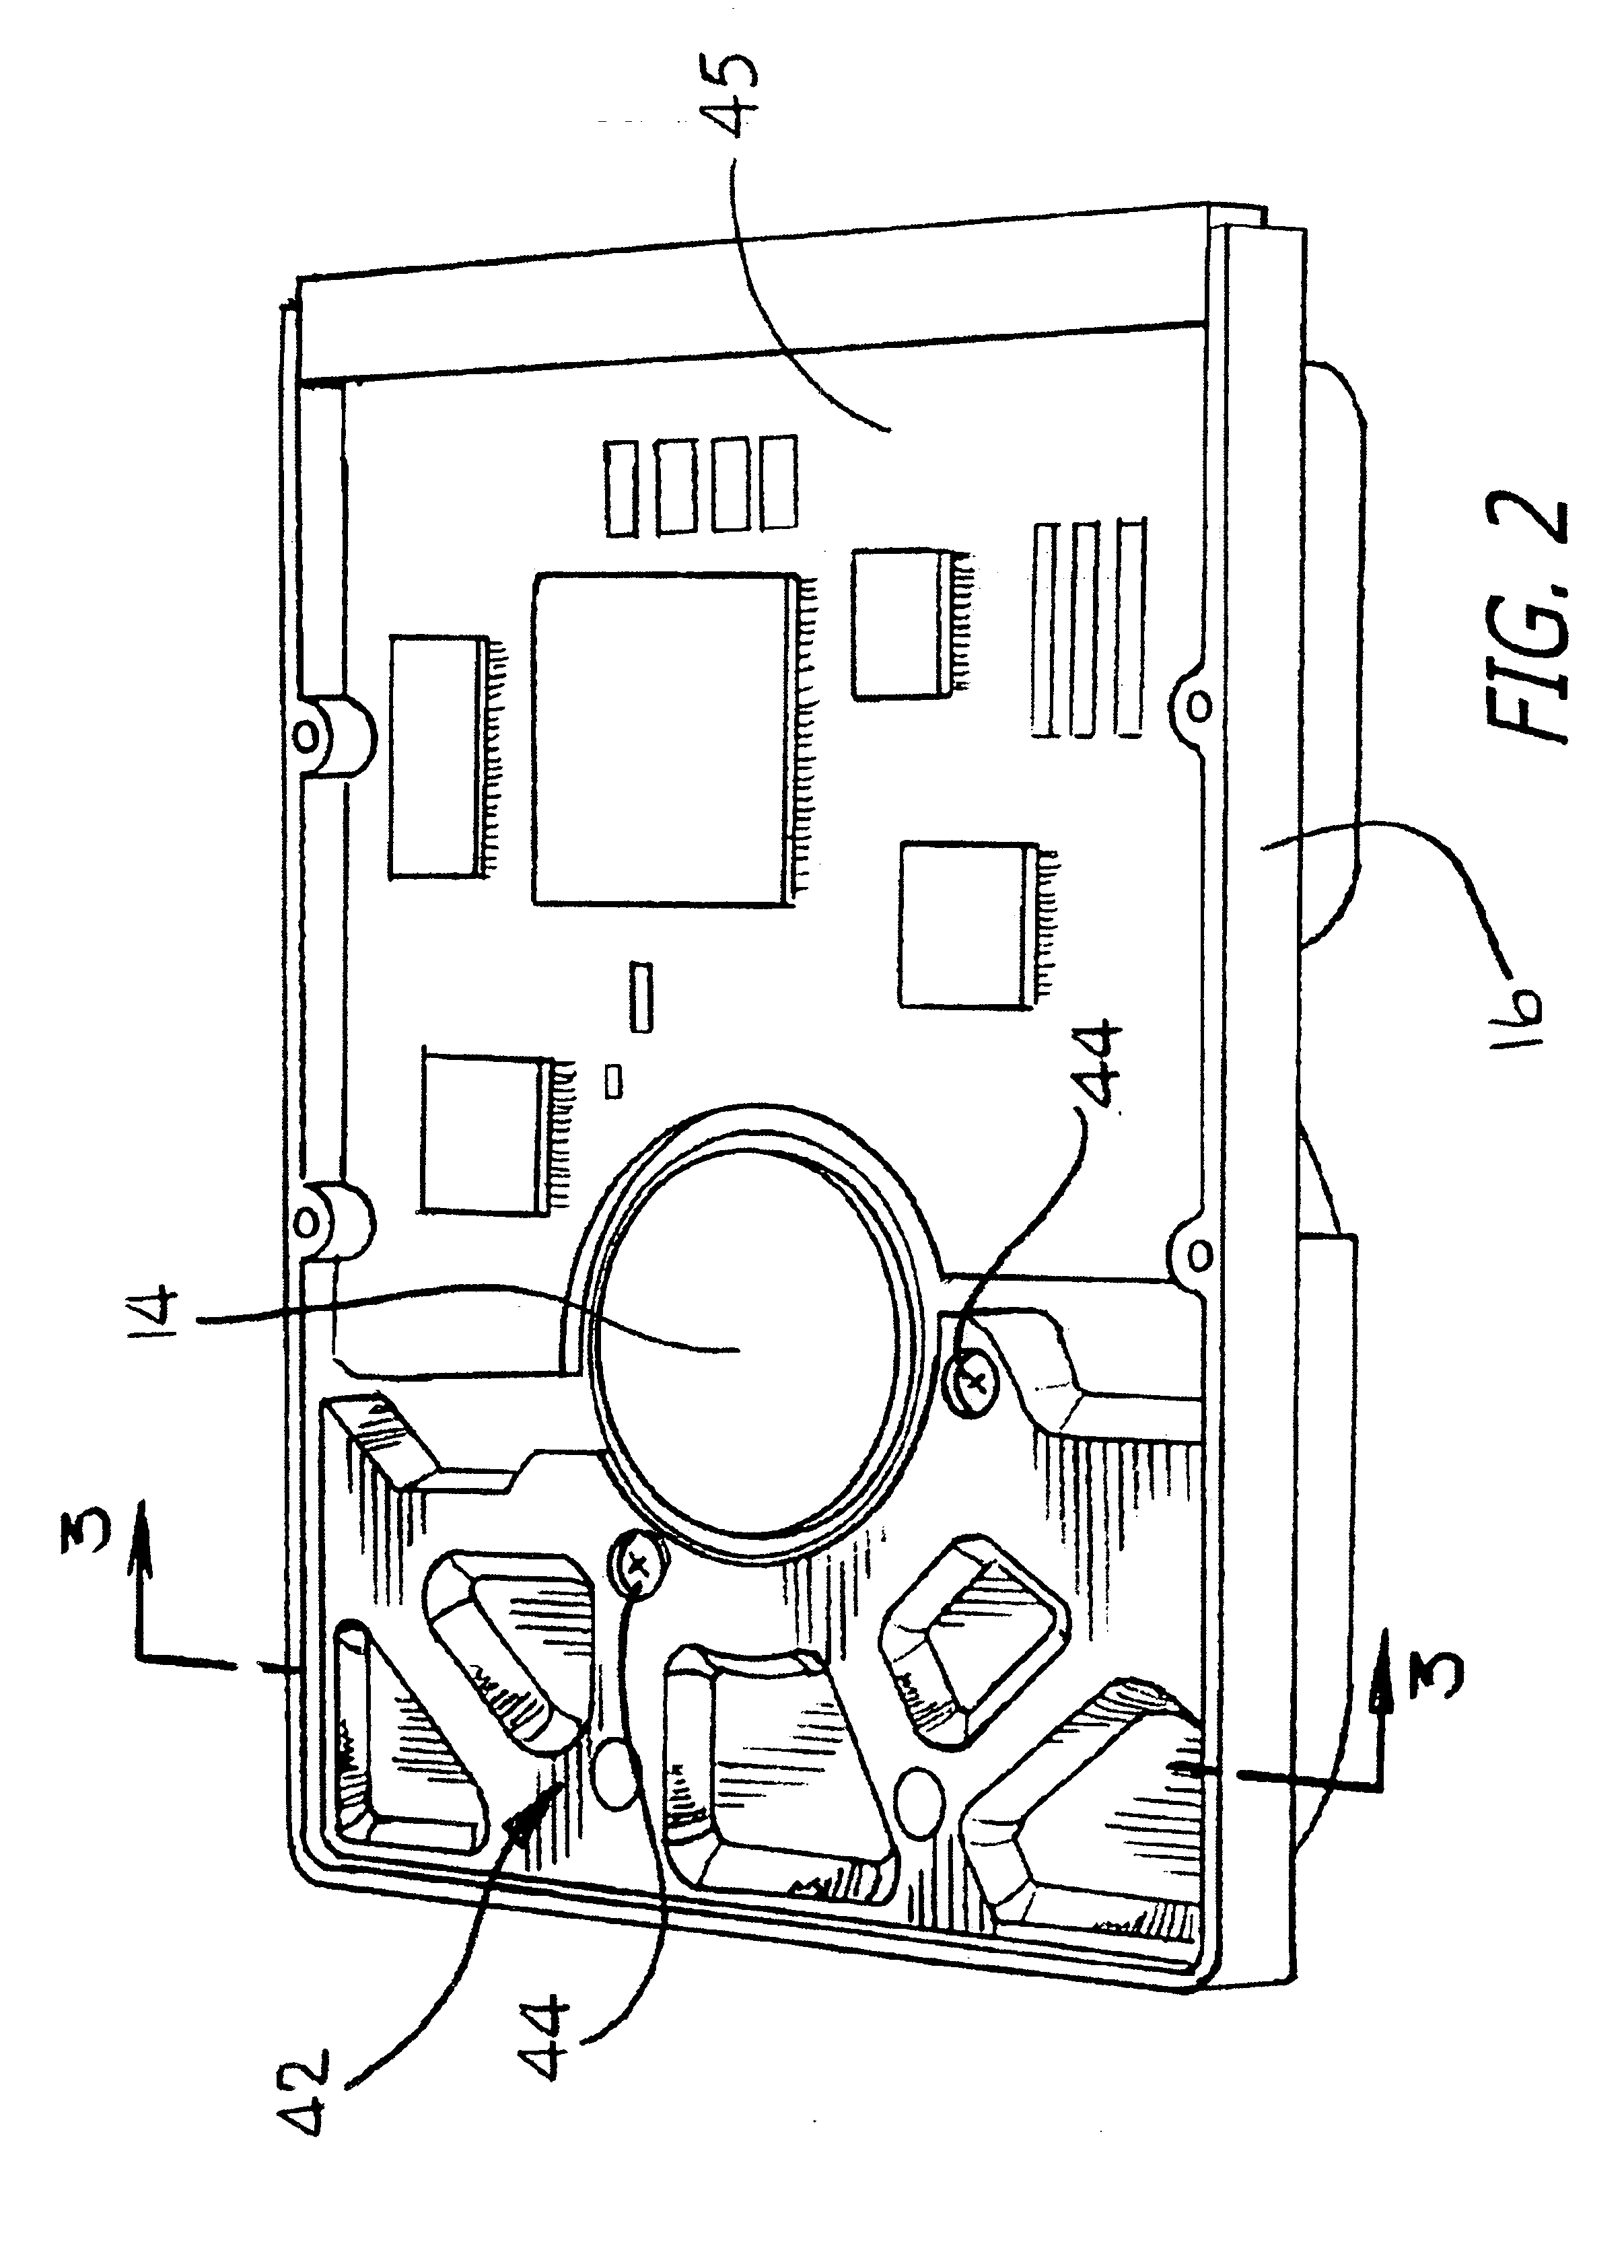 Wave stringer for controlling acoustic noise and shock vibration in a storage device